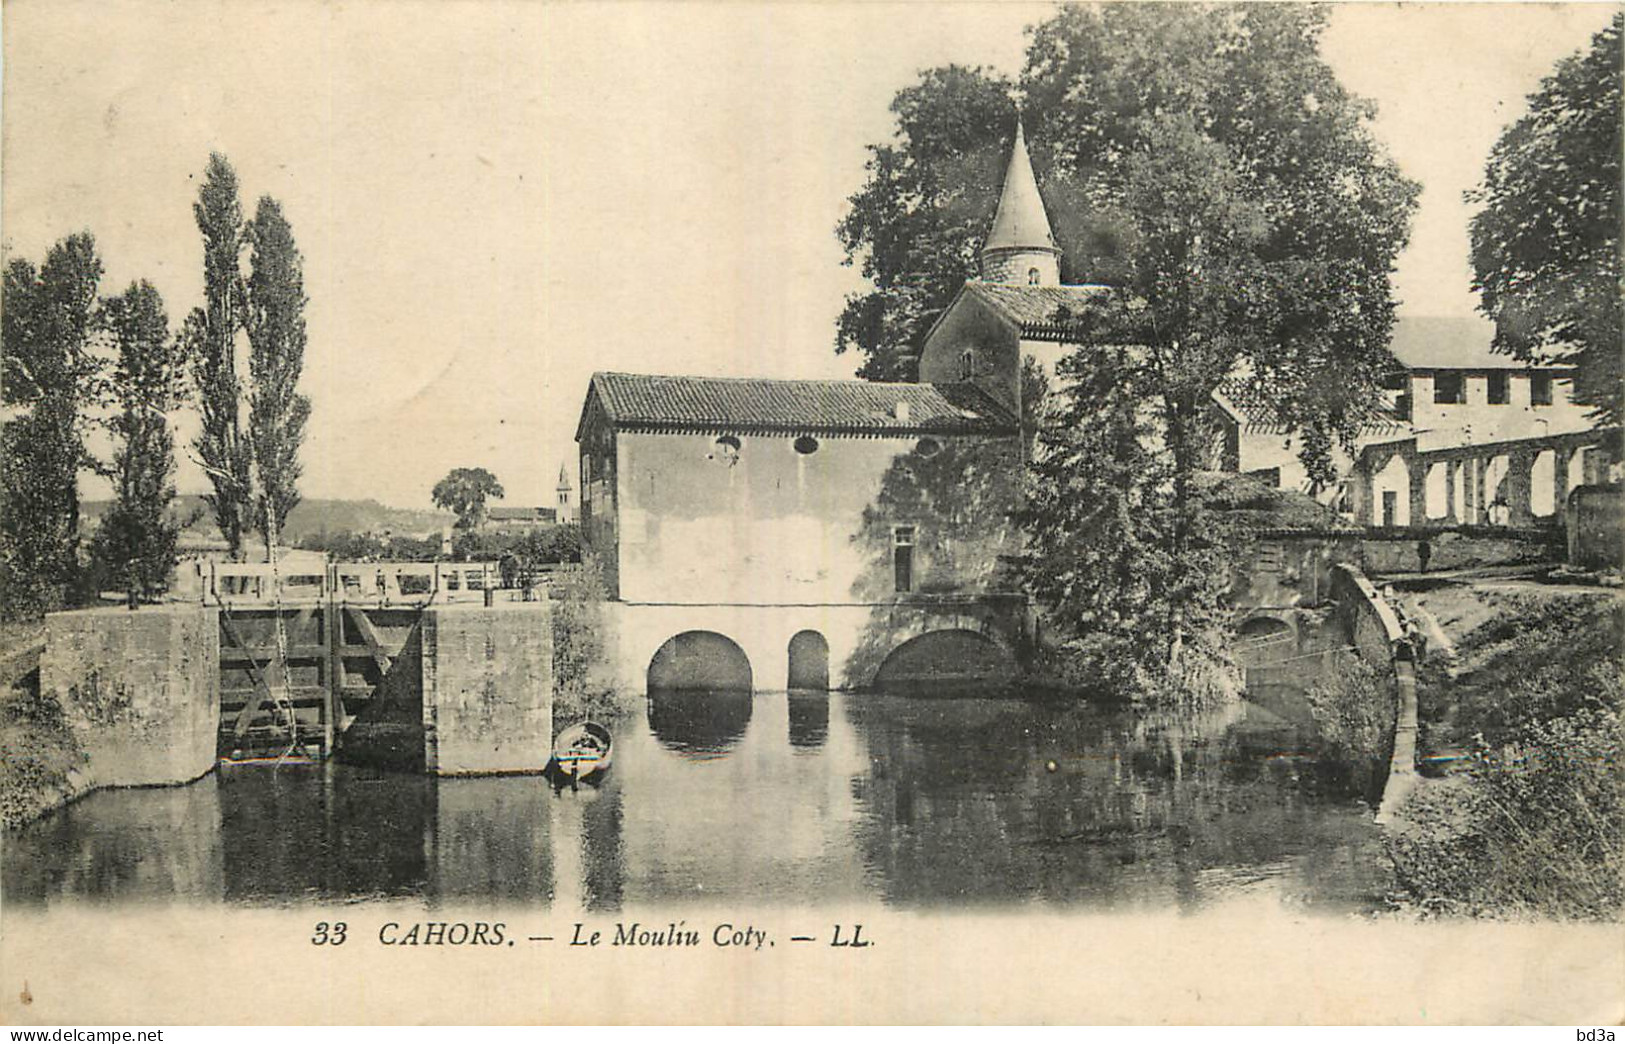 46 - CAHORS - LE MOULIN COTY - LL - 33 - Cahors